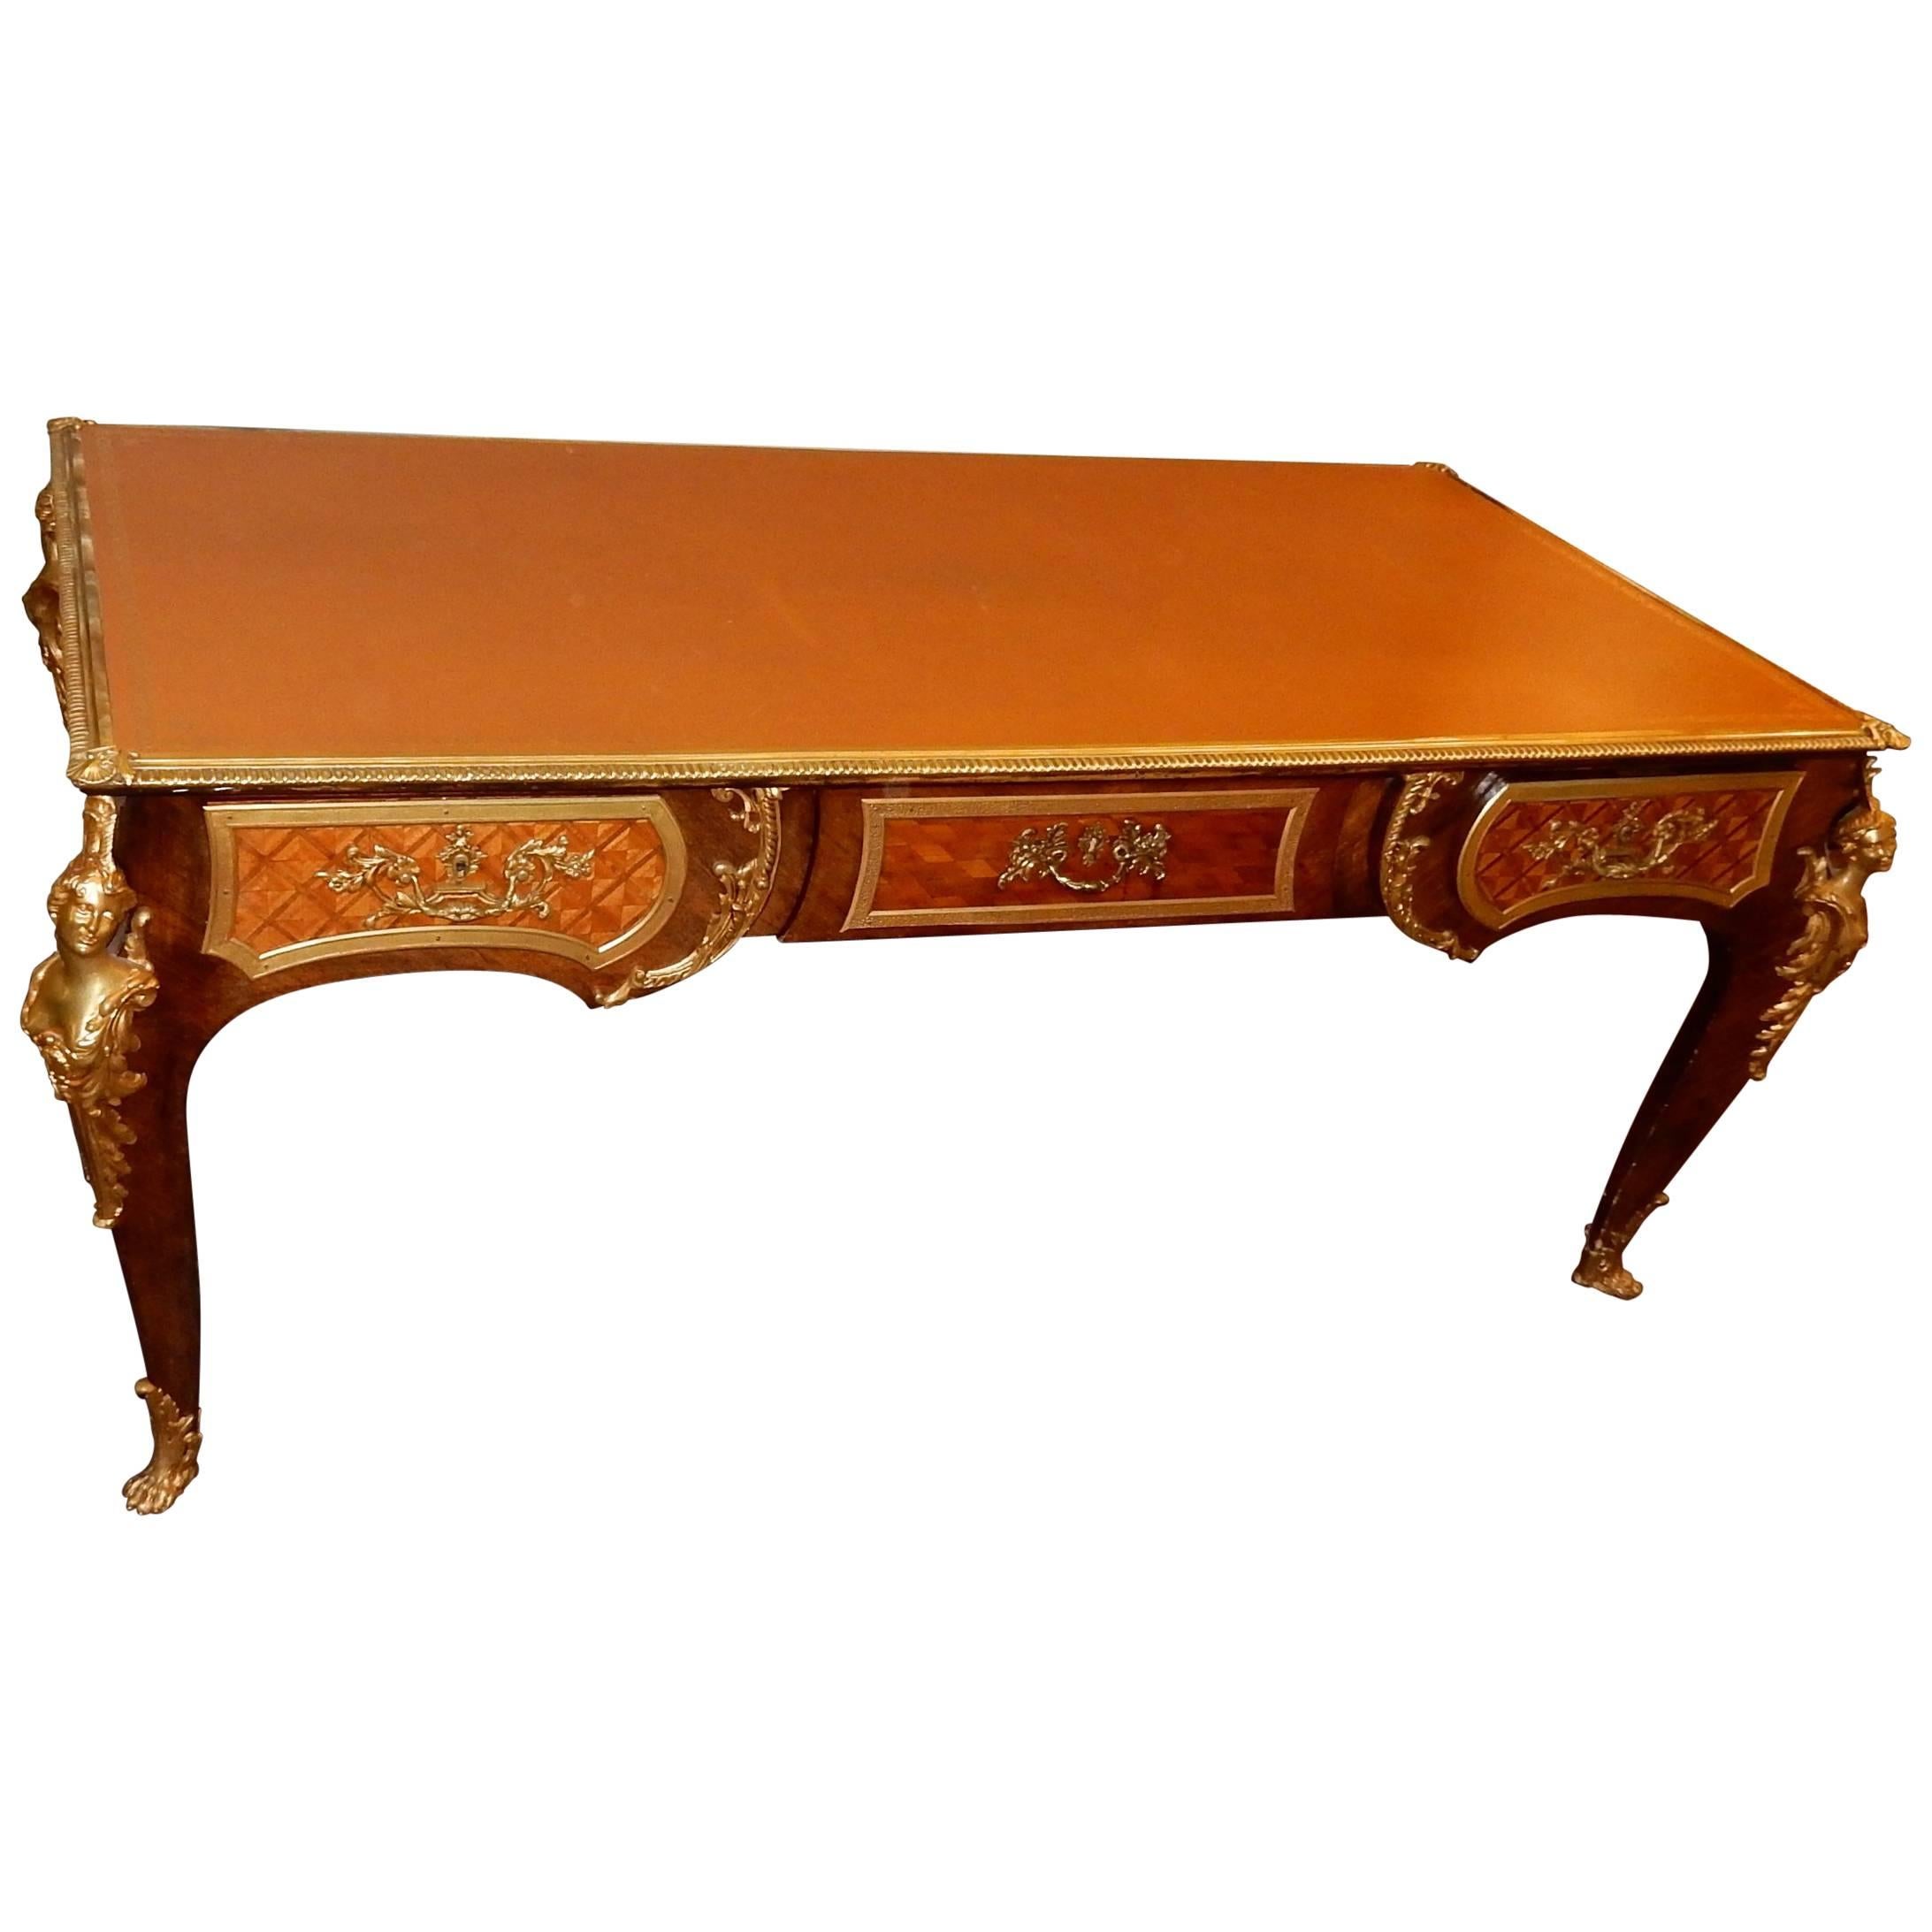 1880-1900 Flat Desk Napoléon III Has l Espagnolette in the Style of Cressent